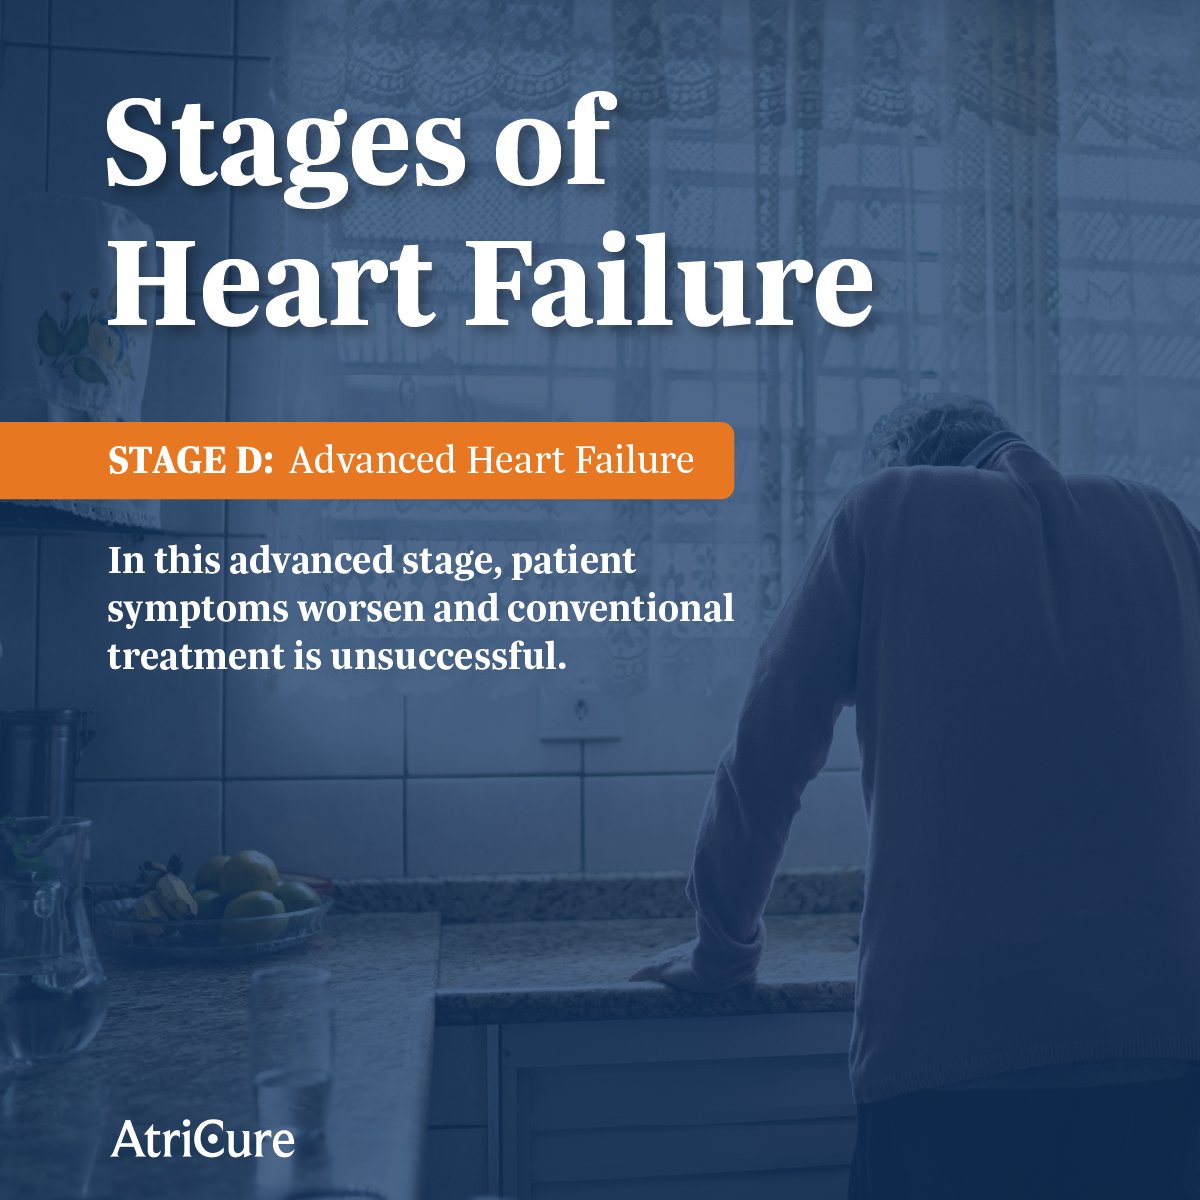 The onset of heart failure can sneak up on patients – including those with Afib. 
Afib can share many of the same risk factors as HF, making it difficult to detect, and Afib promotes HF development through multiple mechanisms. (1/2)
#HeartFailureAwarenessWeek